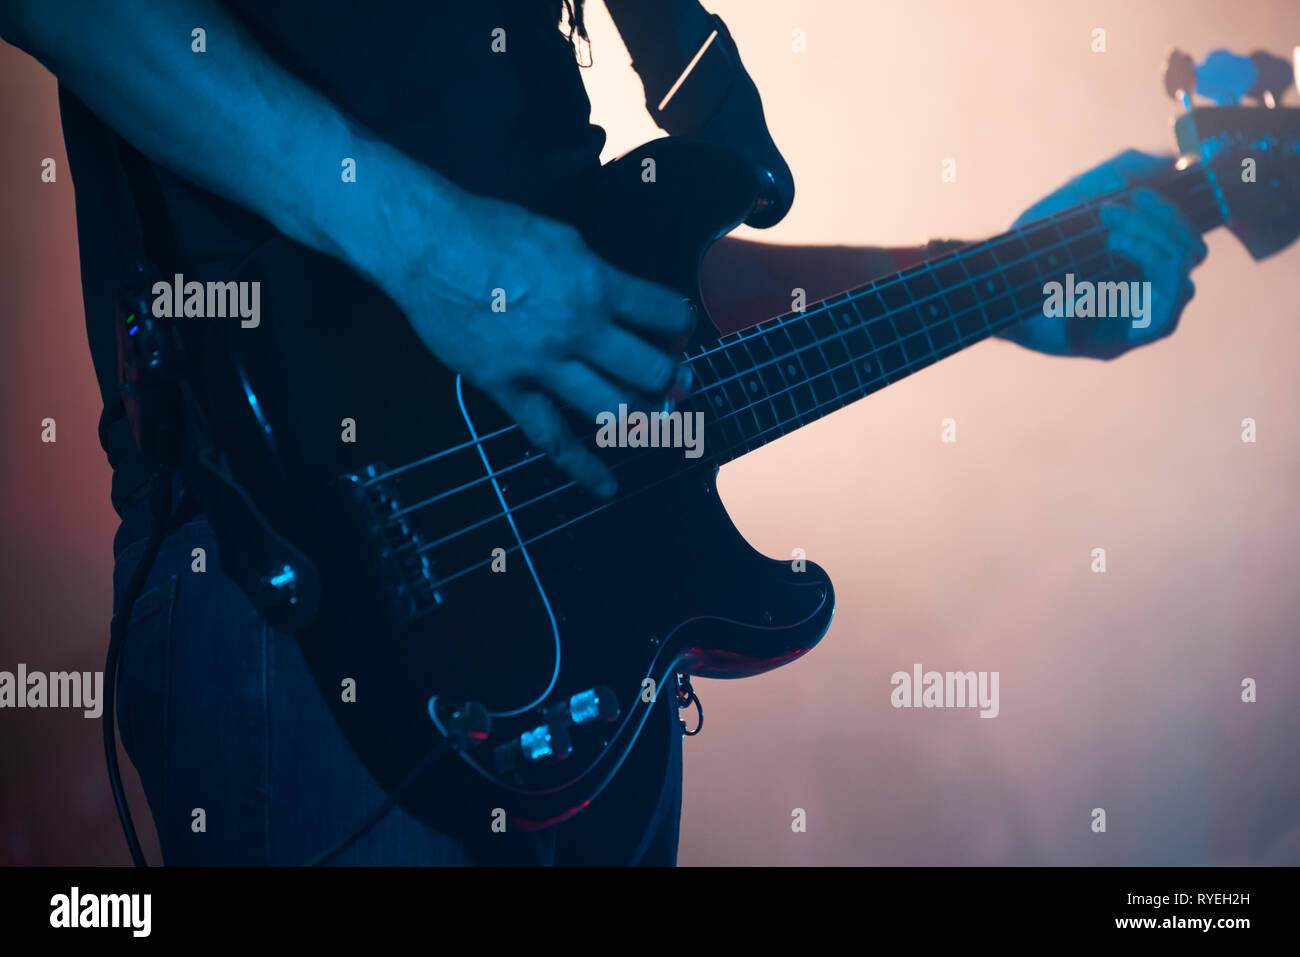 Live rock music background, electric bass guitar player in blue stage lights, closeup photo with soft selective focus Stock Photo